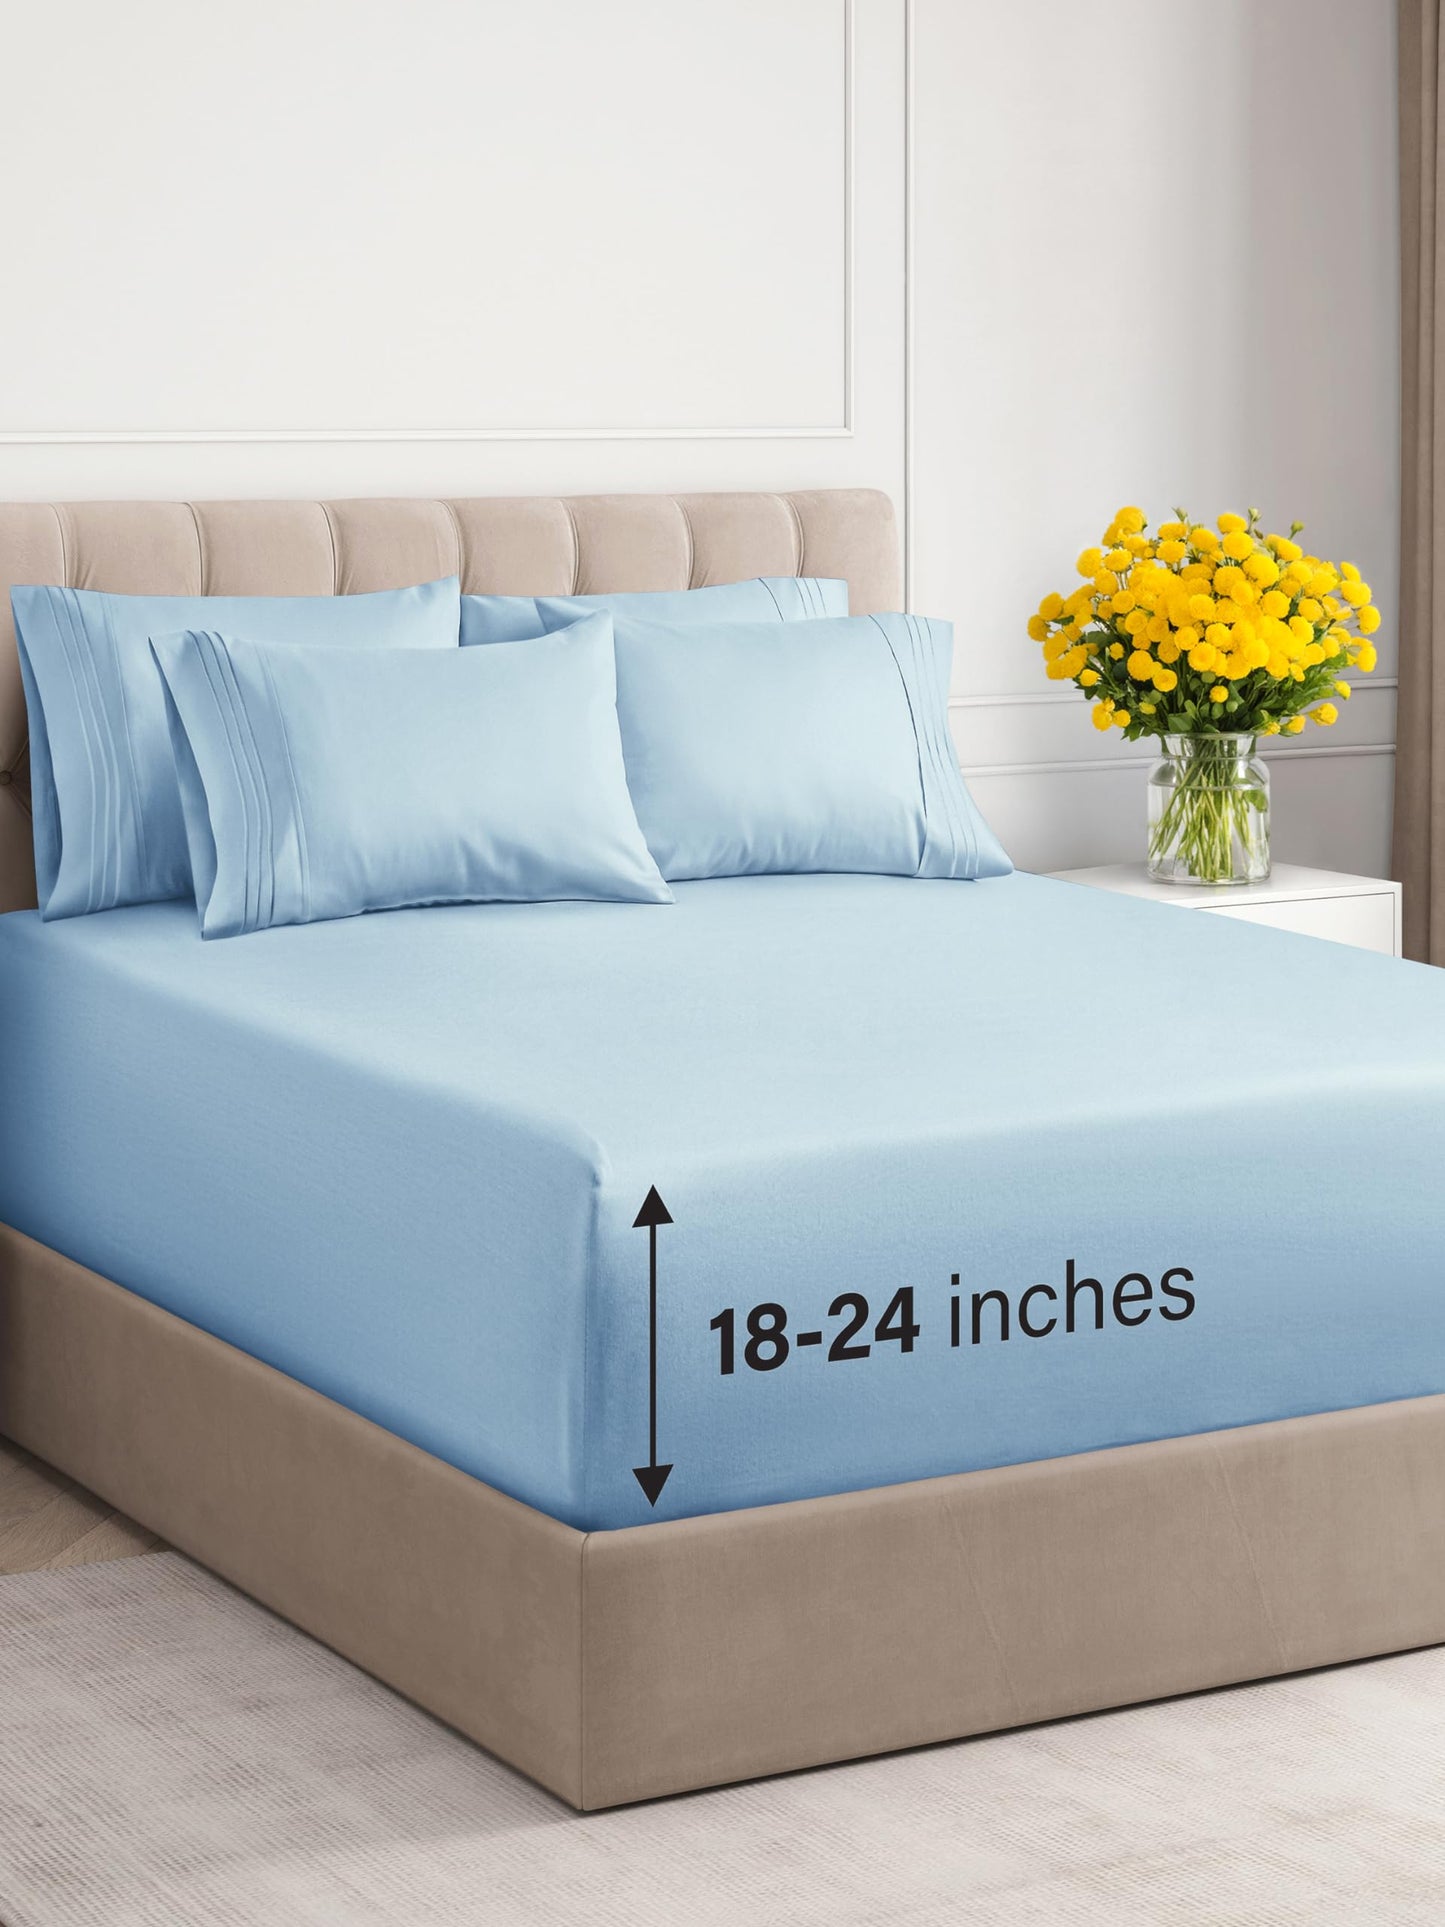 Extra Deep Cal King Sheet Set - 6 Piece Breathable & Cooling Sheets - Hotel Luxury Bed Sheets Set - Easy Fit - Soft, Wrinkle Free & Comfy Sheets Set - Light Blue Sheet Set w/Extra Deep Pockets